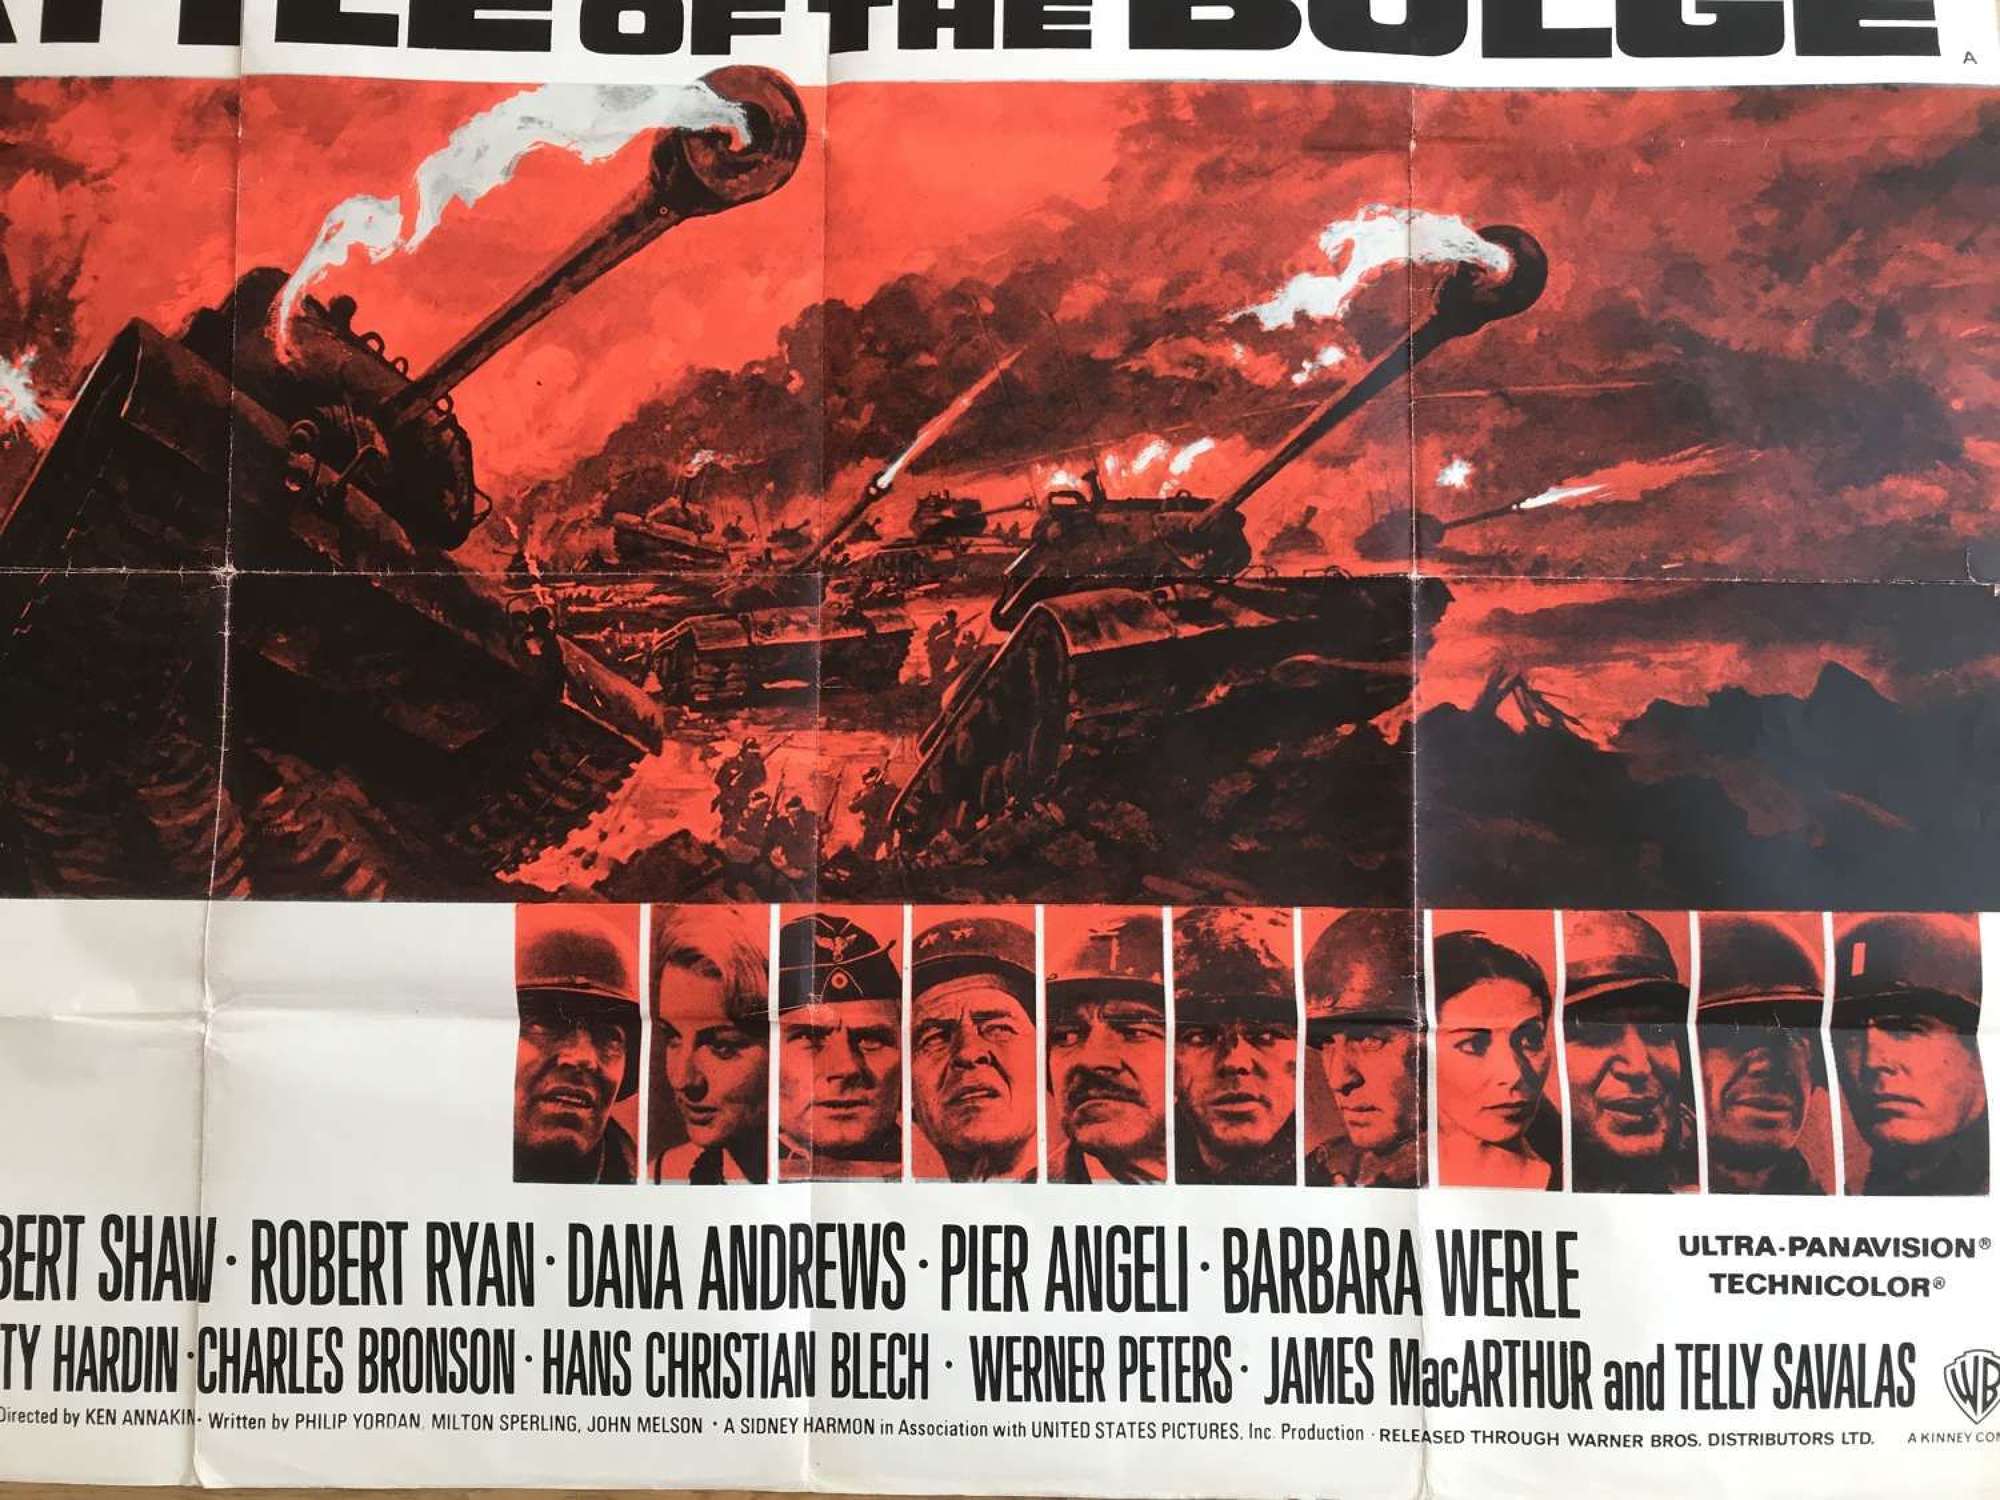 Battle of the bulge film poster dating from 1965